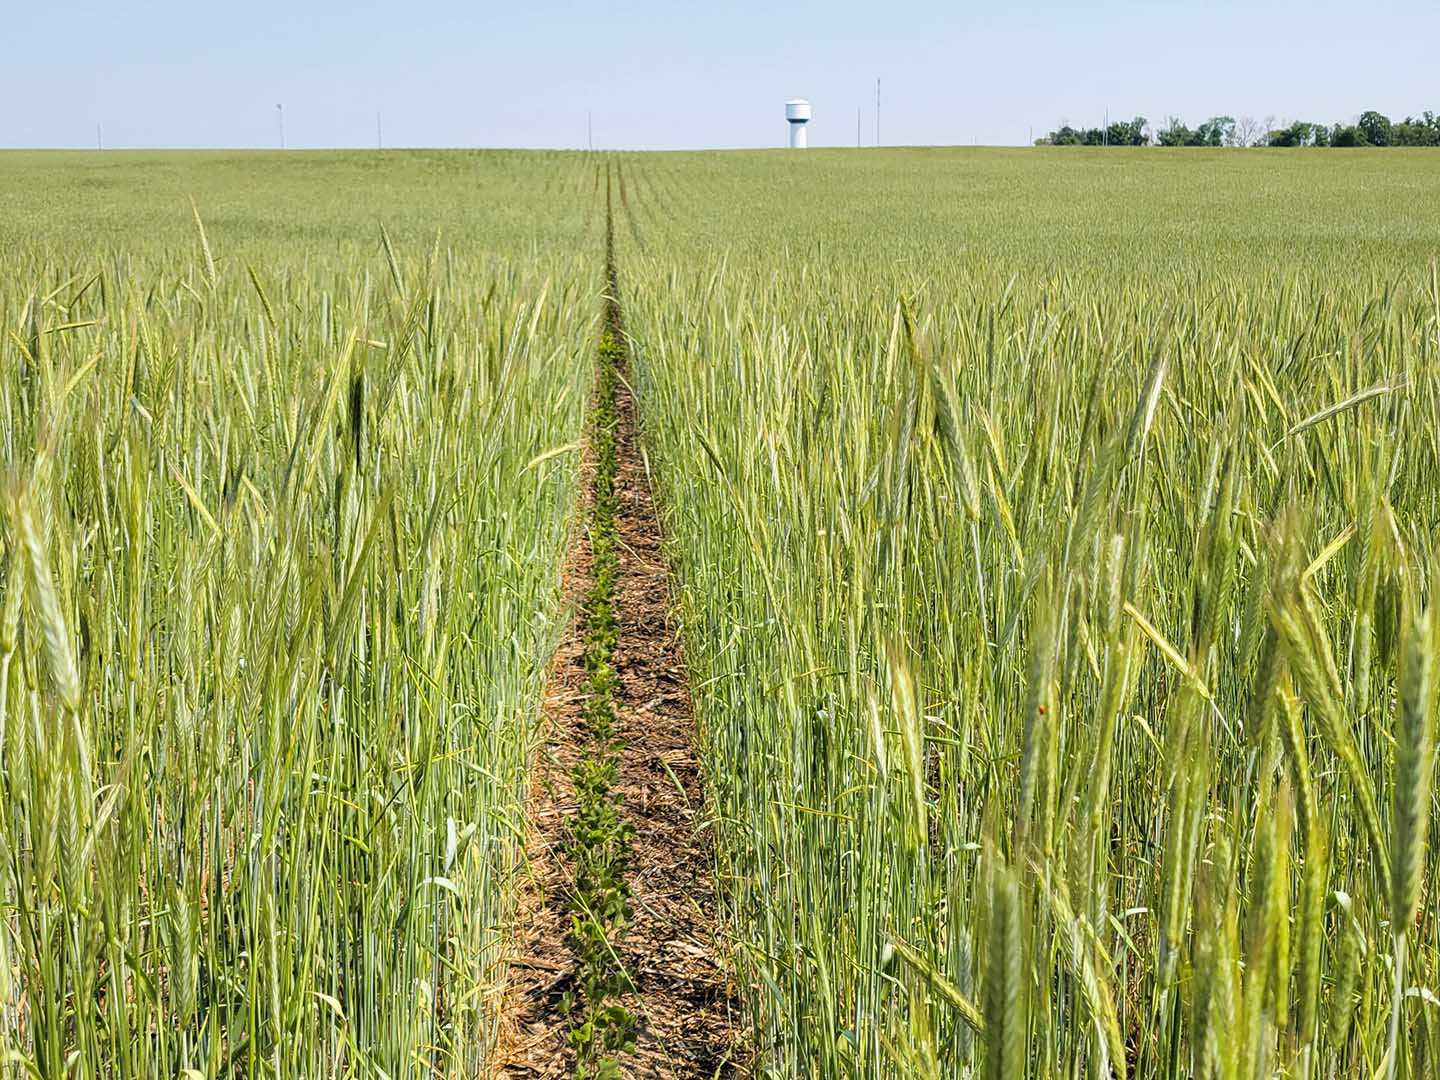 Two crops planted in same field